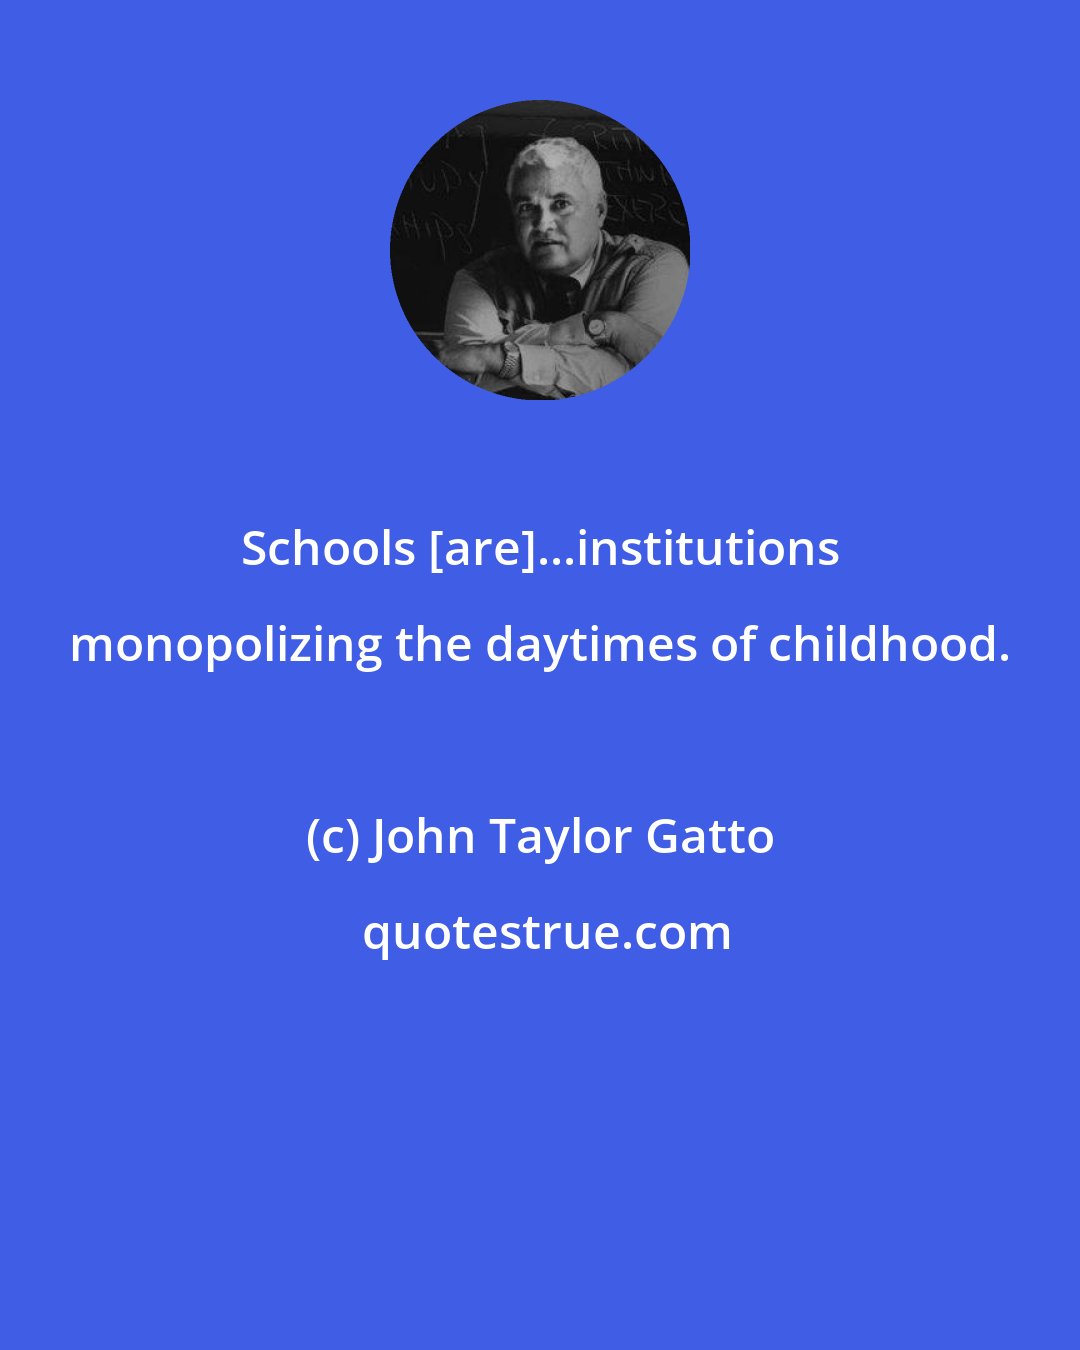 John Taylor Gatto: Schools [are]...institutions monopolizing the daytimes of childhood.